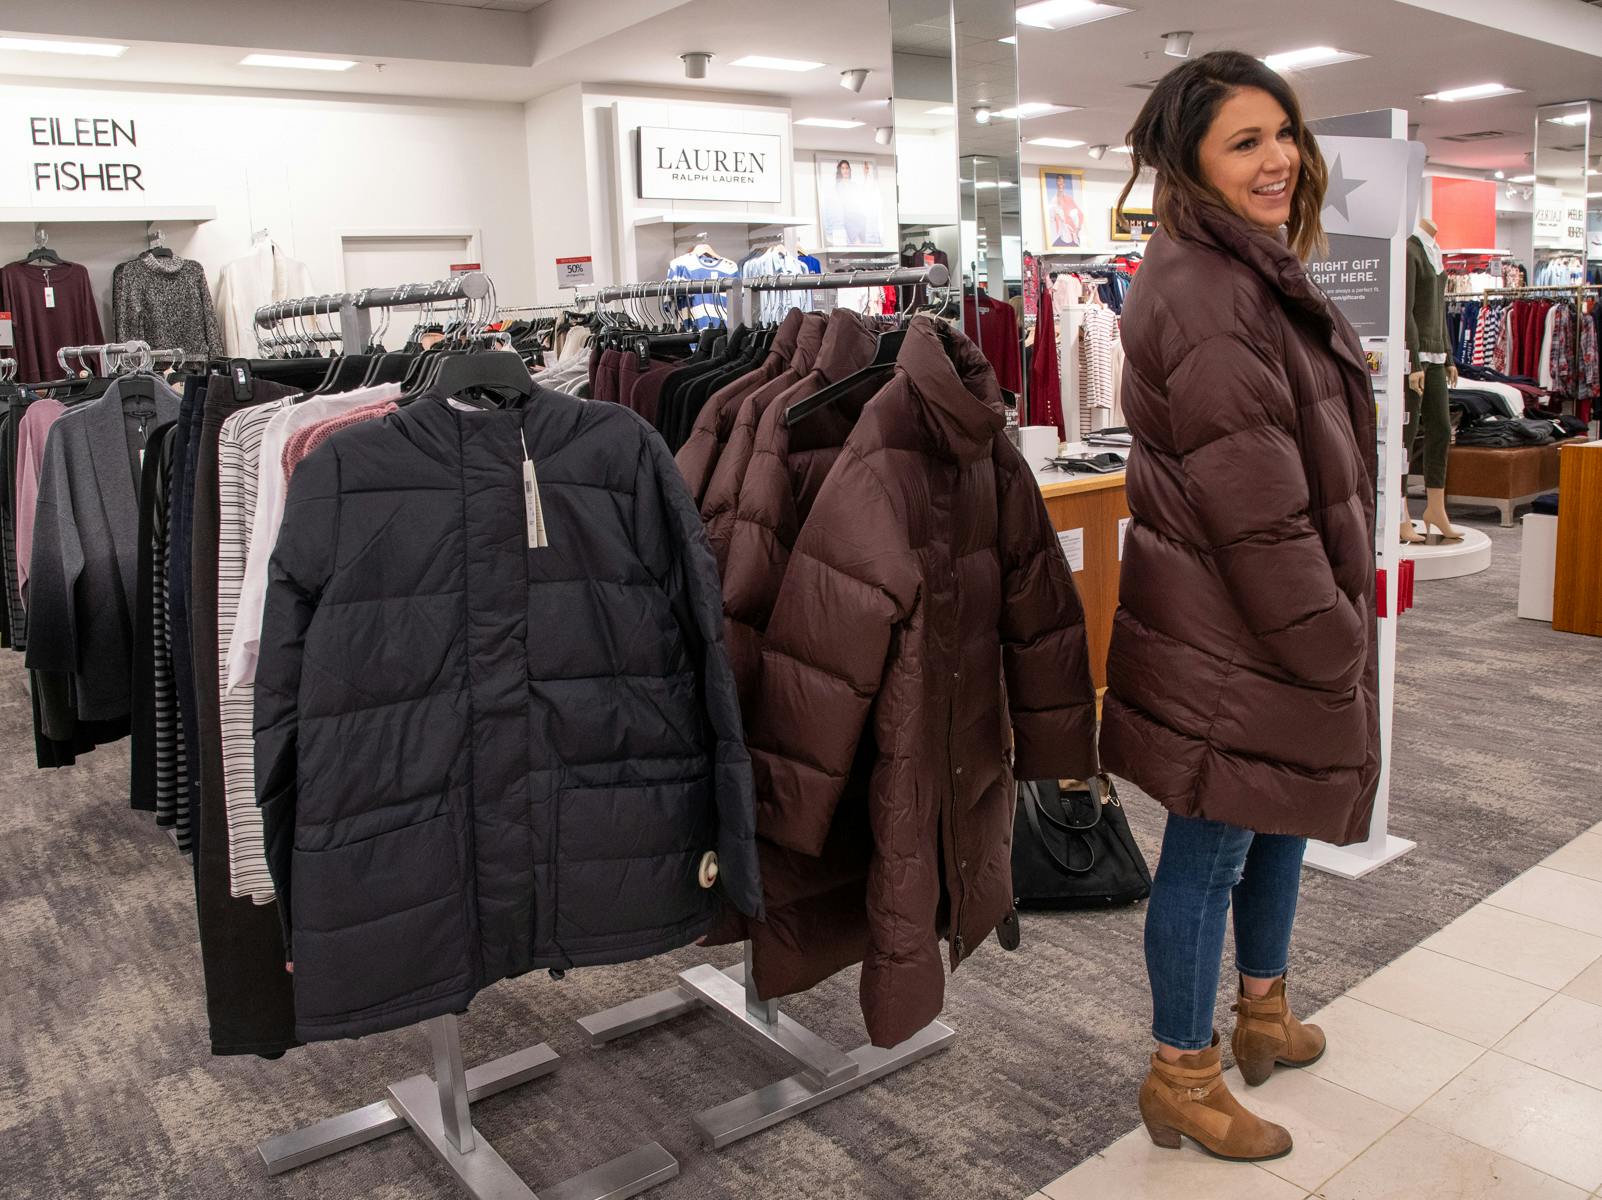 Best Winter Clearance Sale Deals on Outerwear - The Krazy Coupon Lady